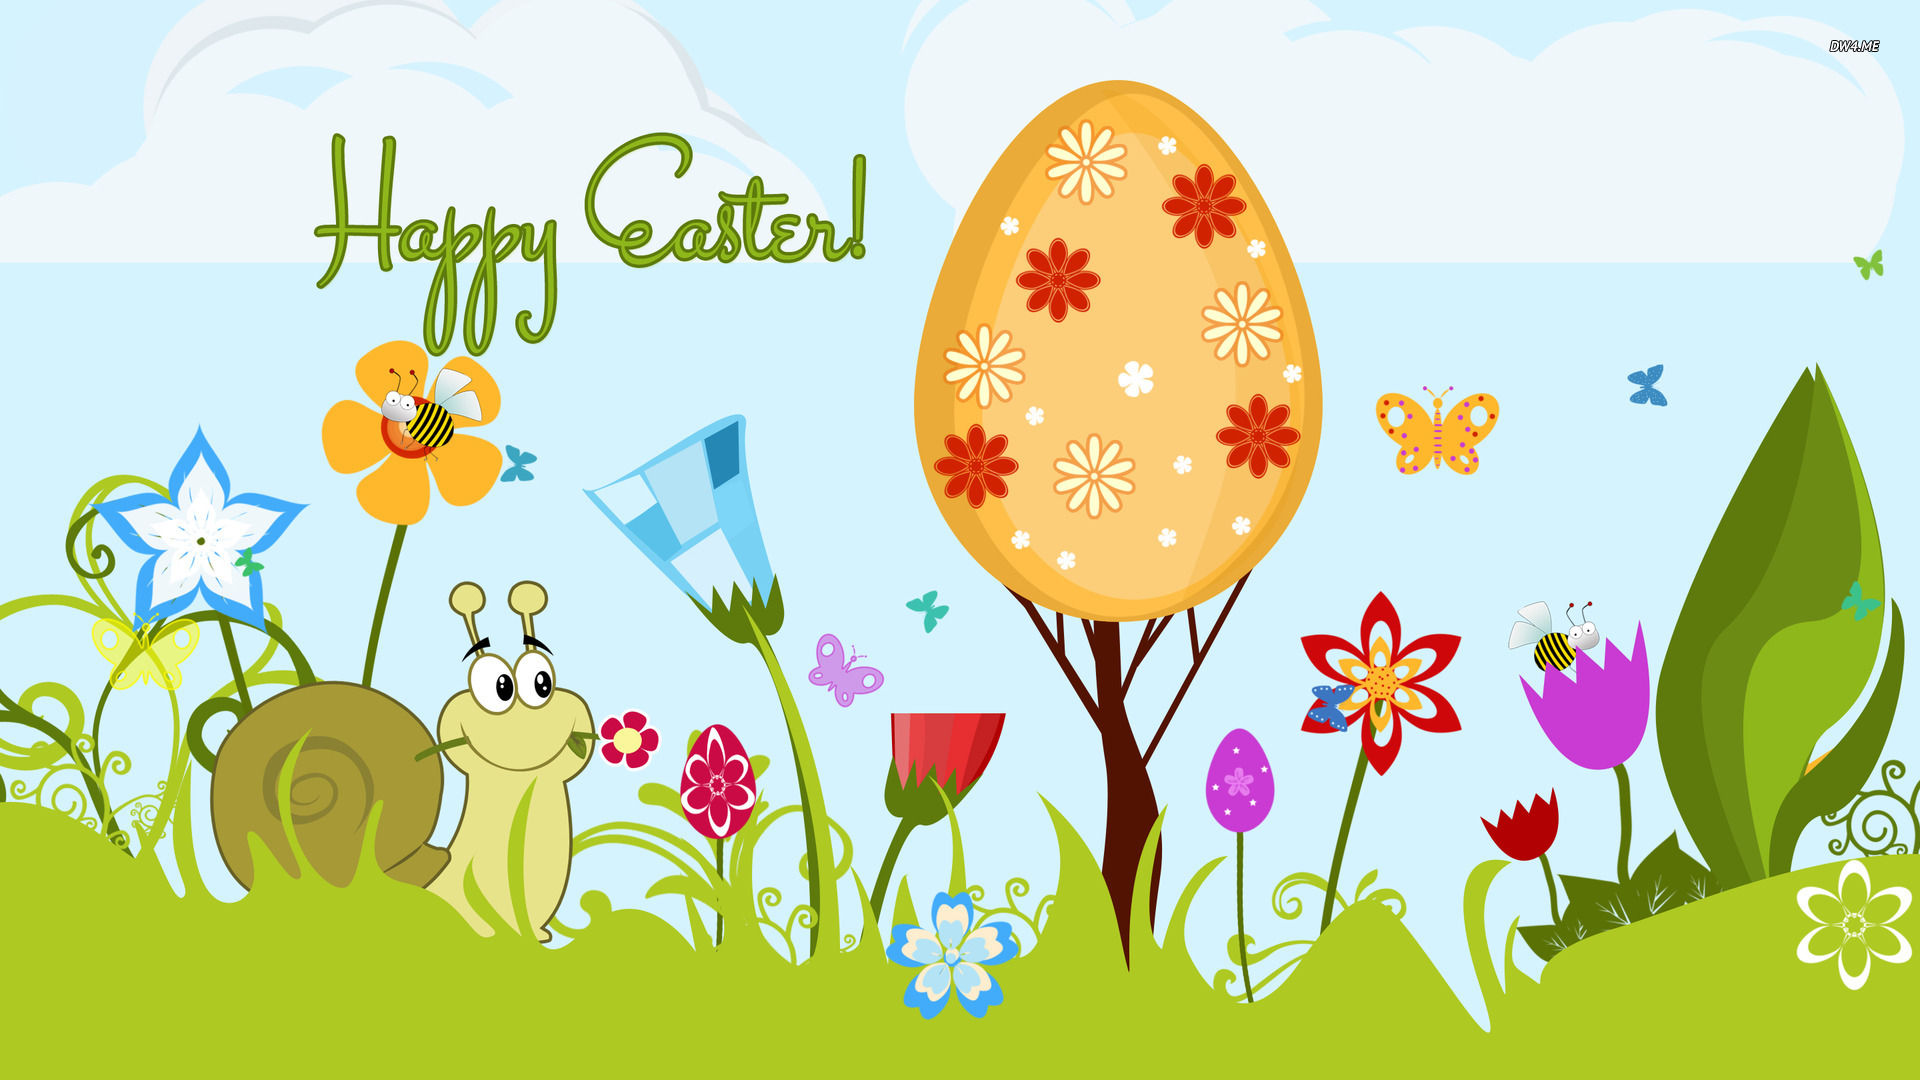 Happy Easter Backgrounds wallpaper   816707